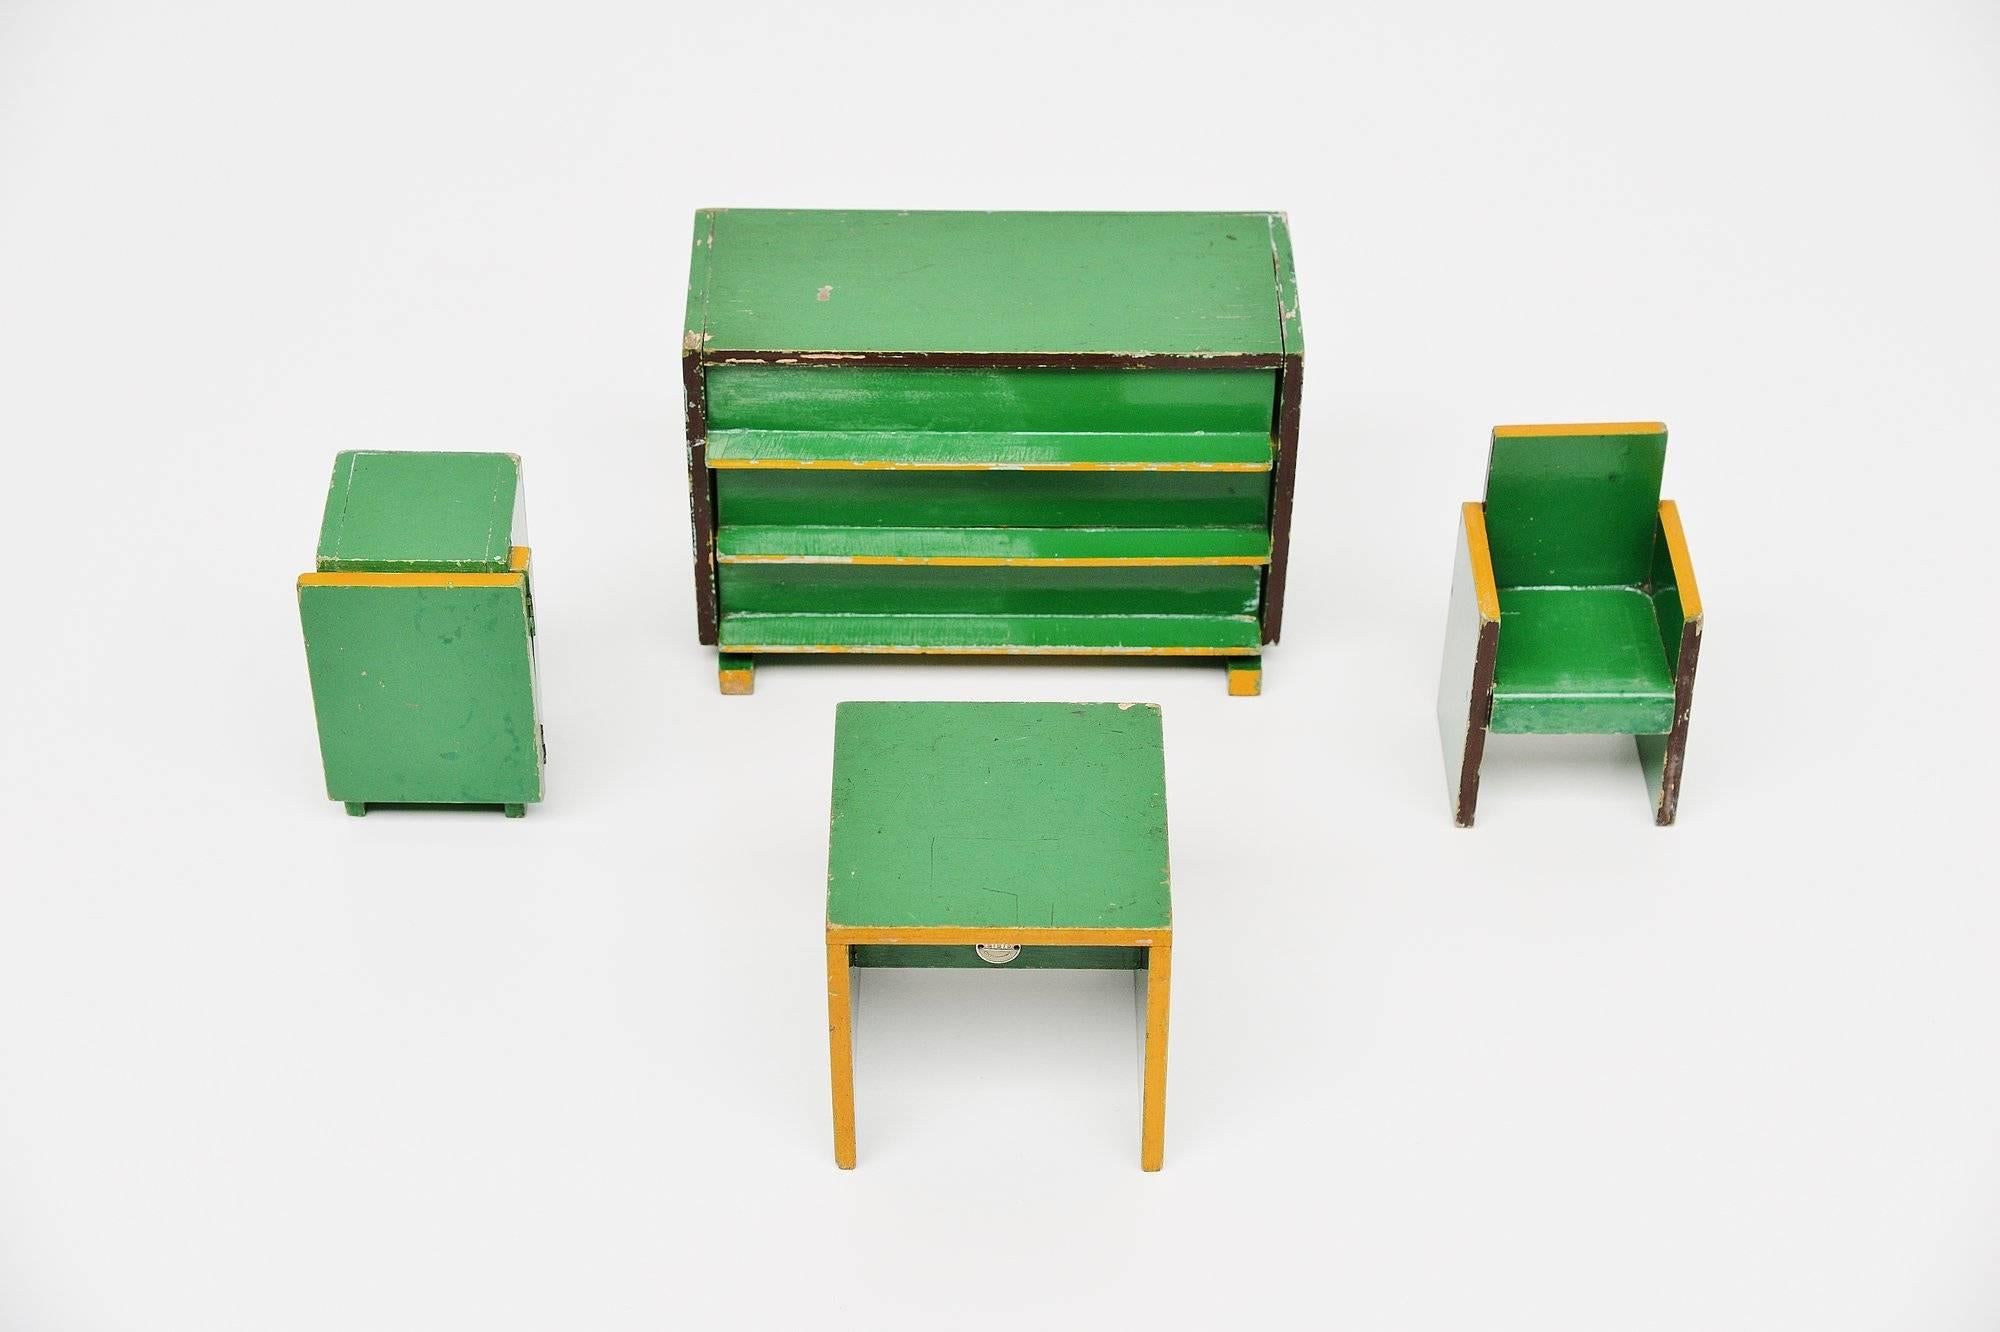 Very nice set of small toy furniture designed by Ko Verzuu for Ado Holland in 1939. Ado means Arbeid door onvolwaardigen, translated; labor by incapacitated, which makes this an even more special piece. Toys by Ado are being highly collected at the